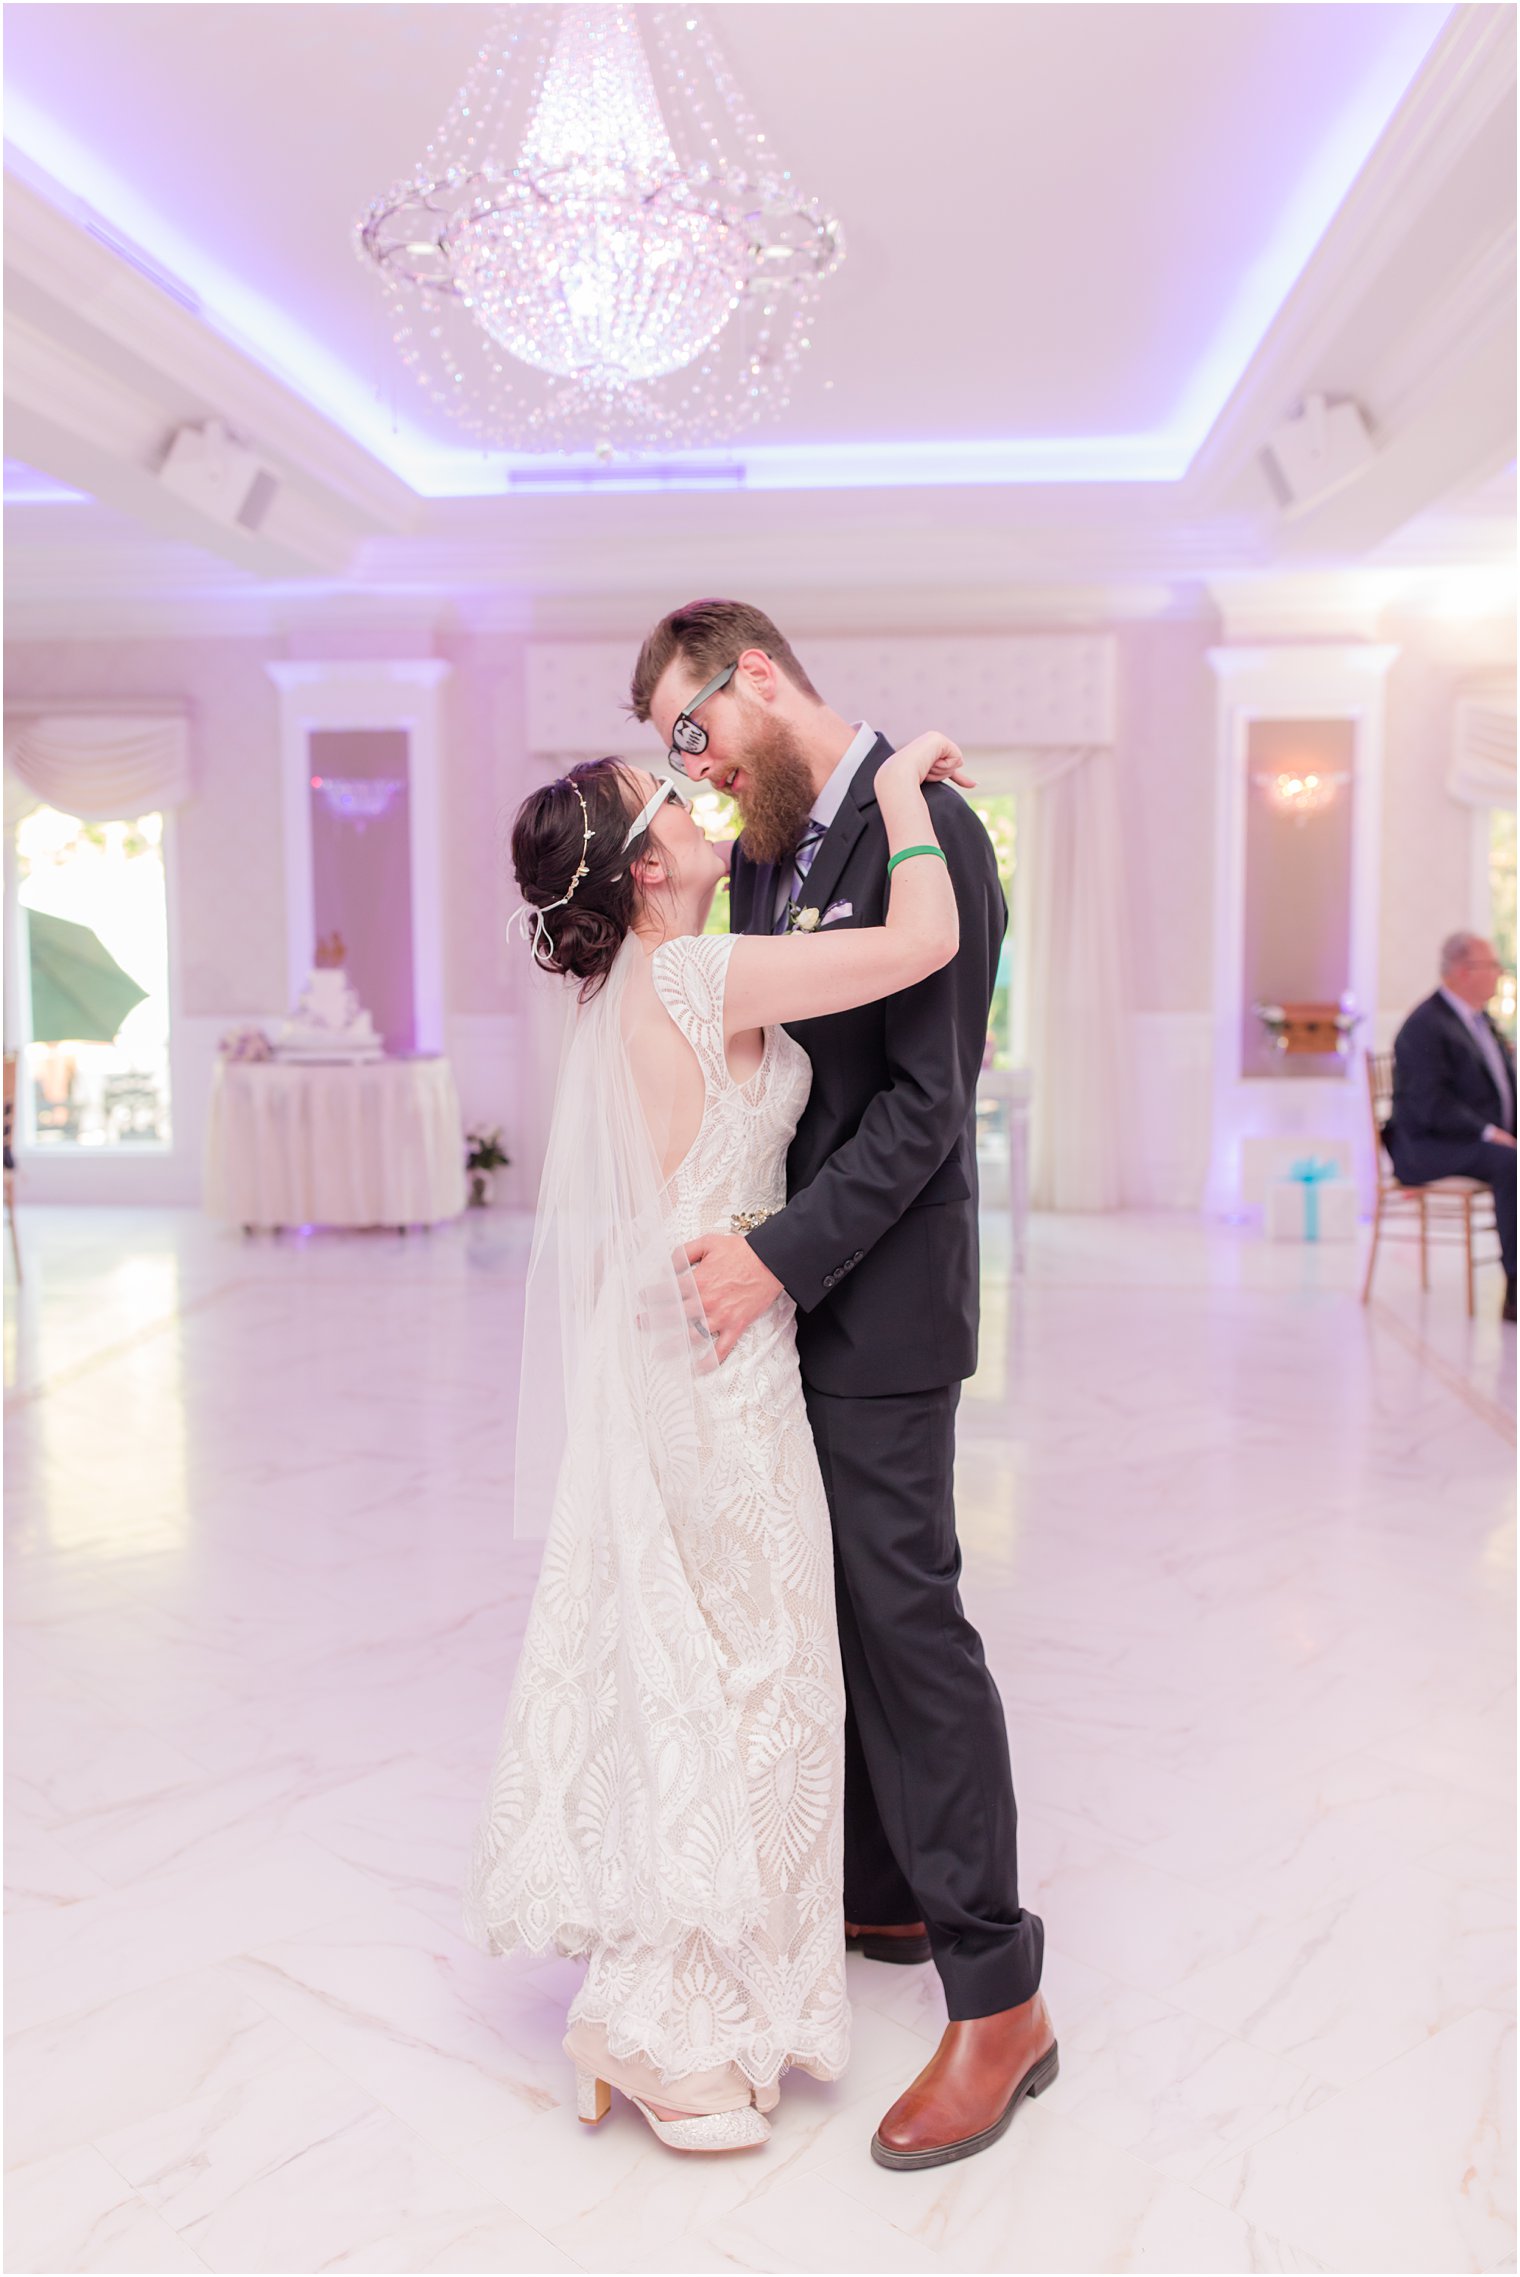 newlyweds dance during wedding reception in New Jersey